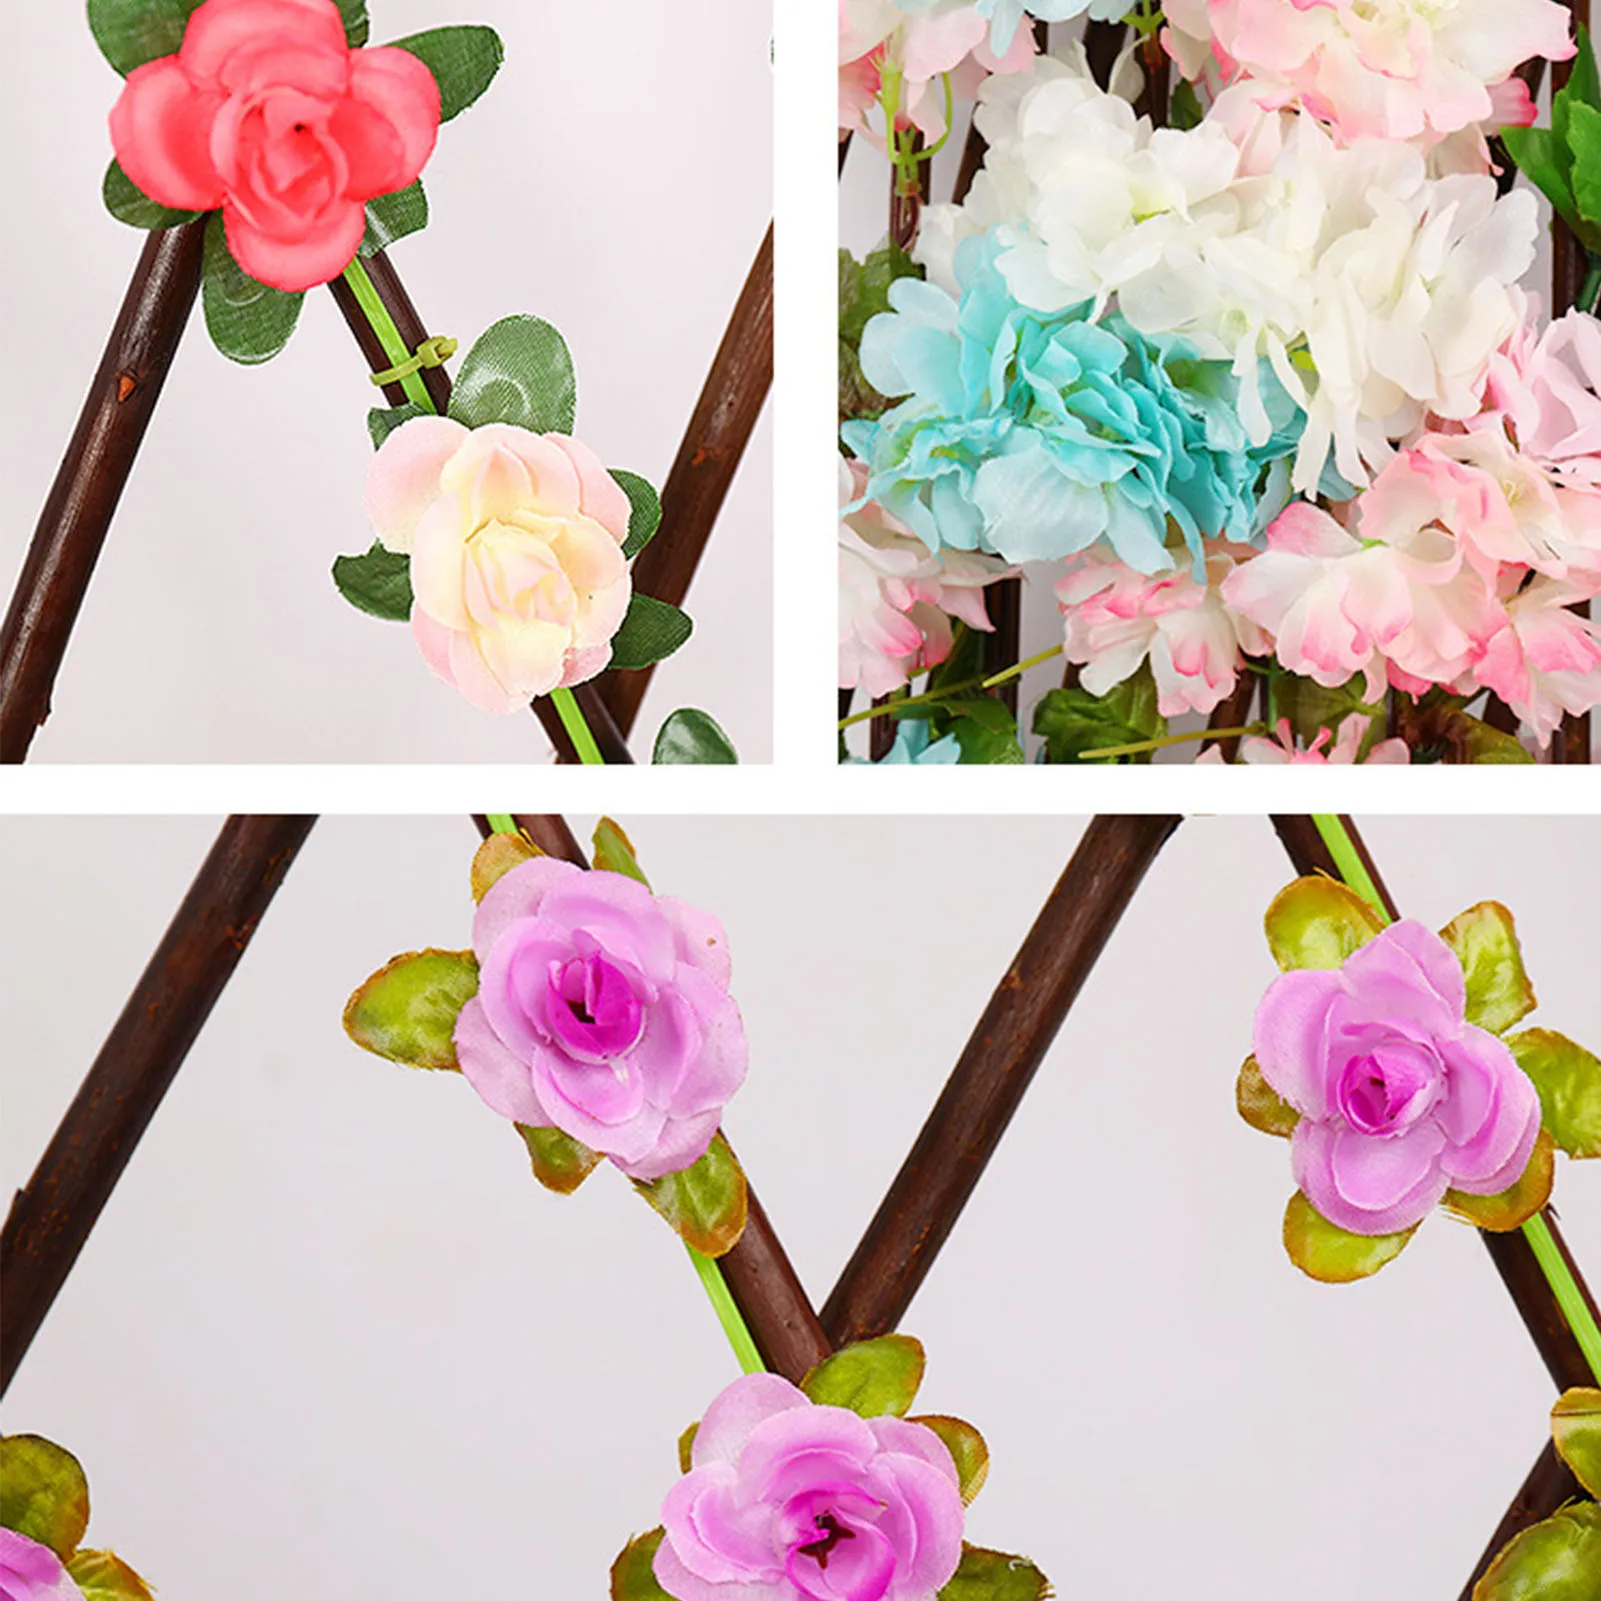 

42cmx22cm Garden Scalable Artificial Flower Fence Sunflower Rose Decorative Fence Privacy Fence Screen Courtyard Wall Decoration